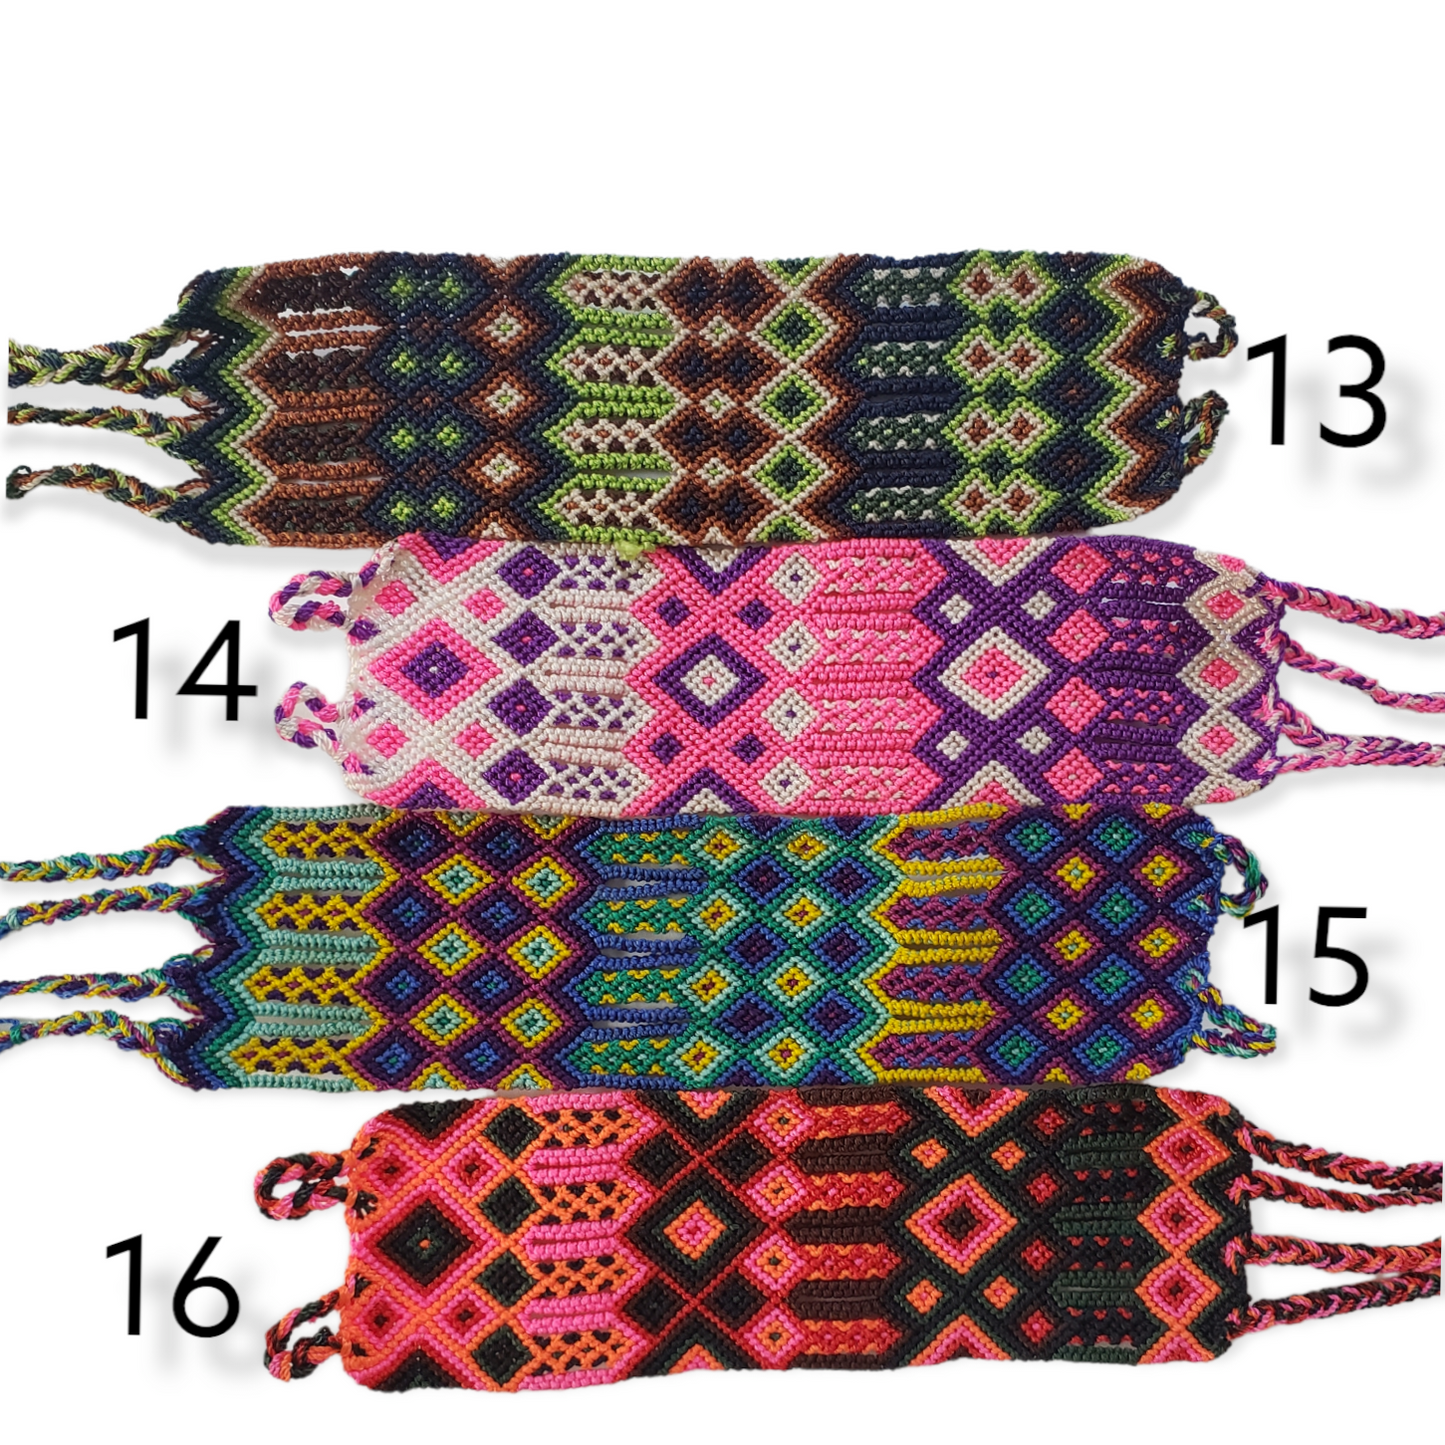 Embroidered Mexican Woven Friendship Bracelets - Long